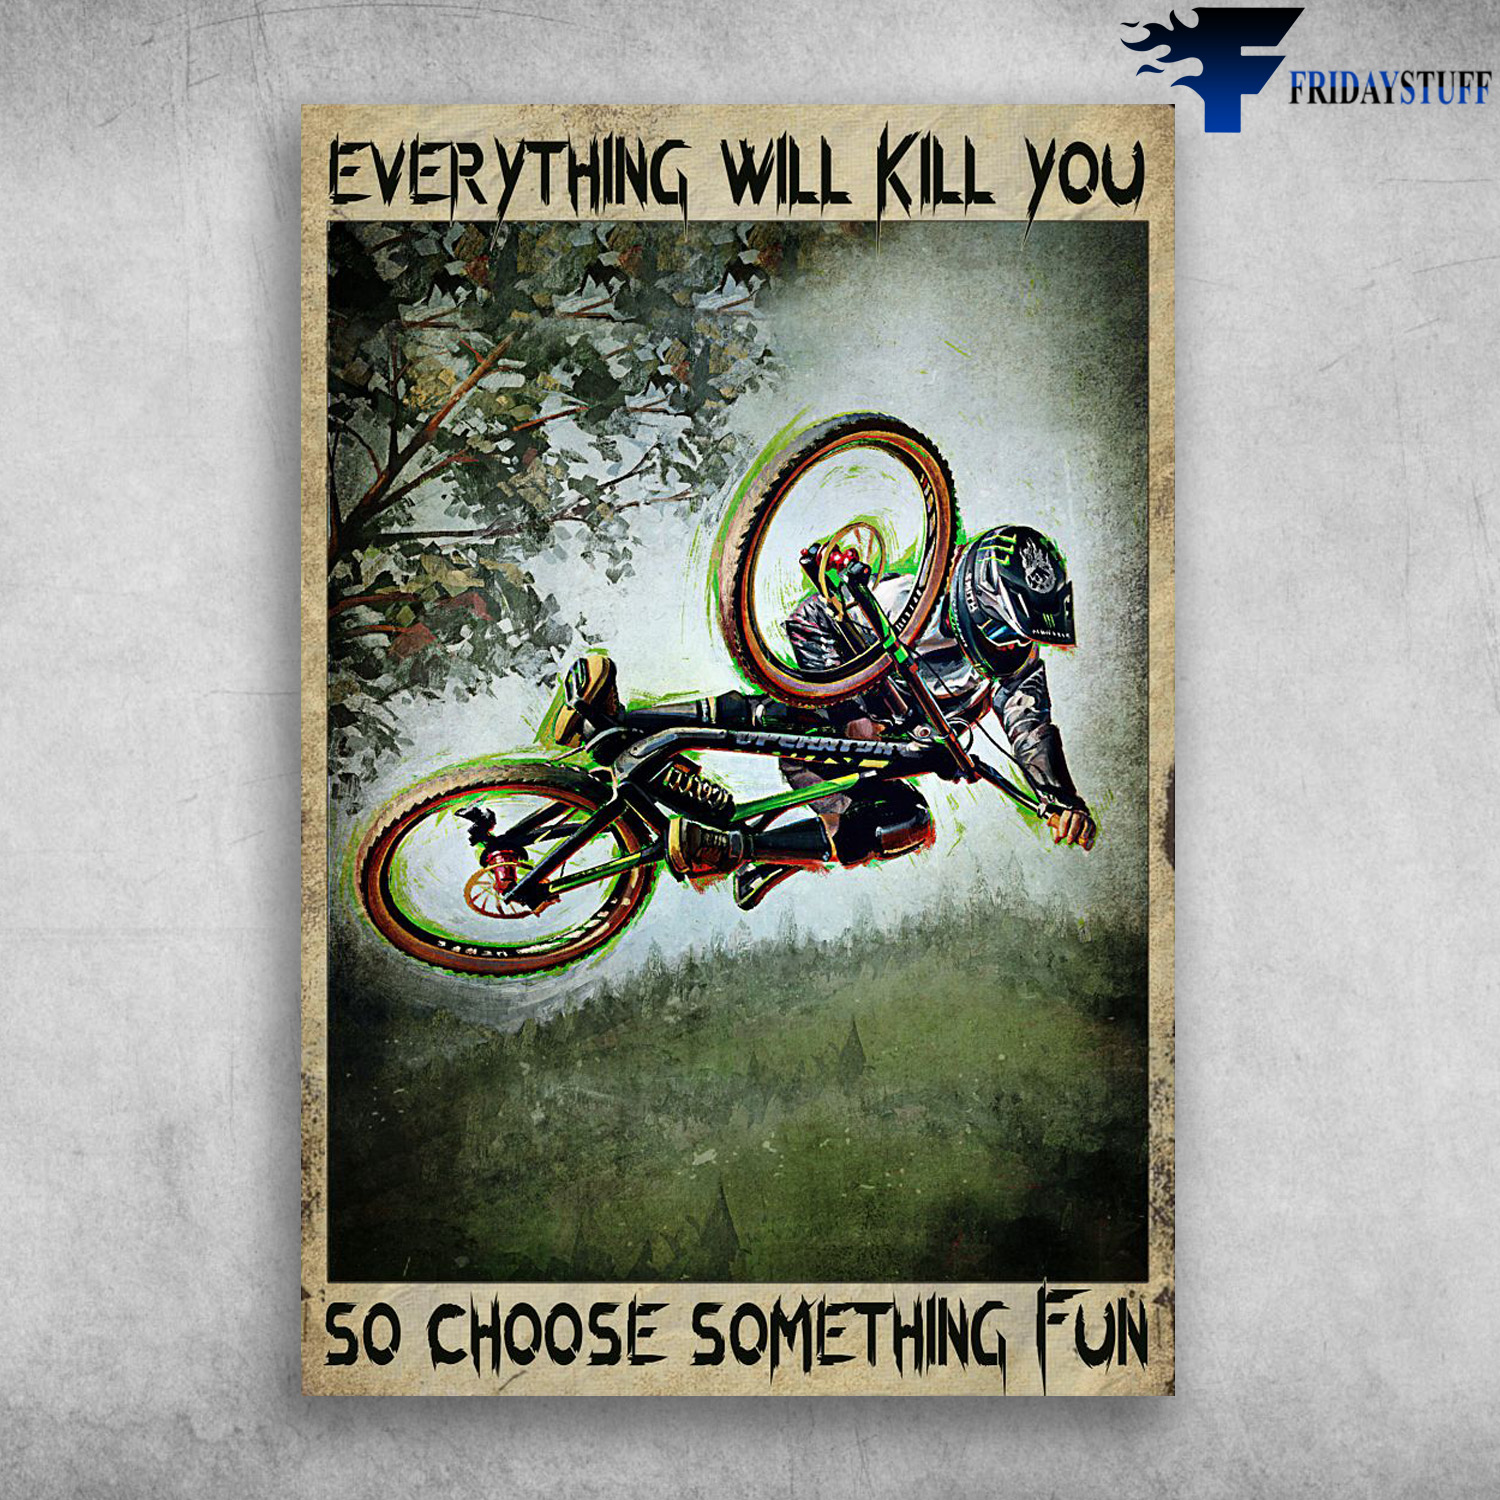 Motocross Racer - Everything With Kill You, So Shoose Something Fun